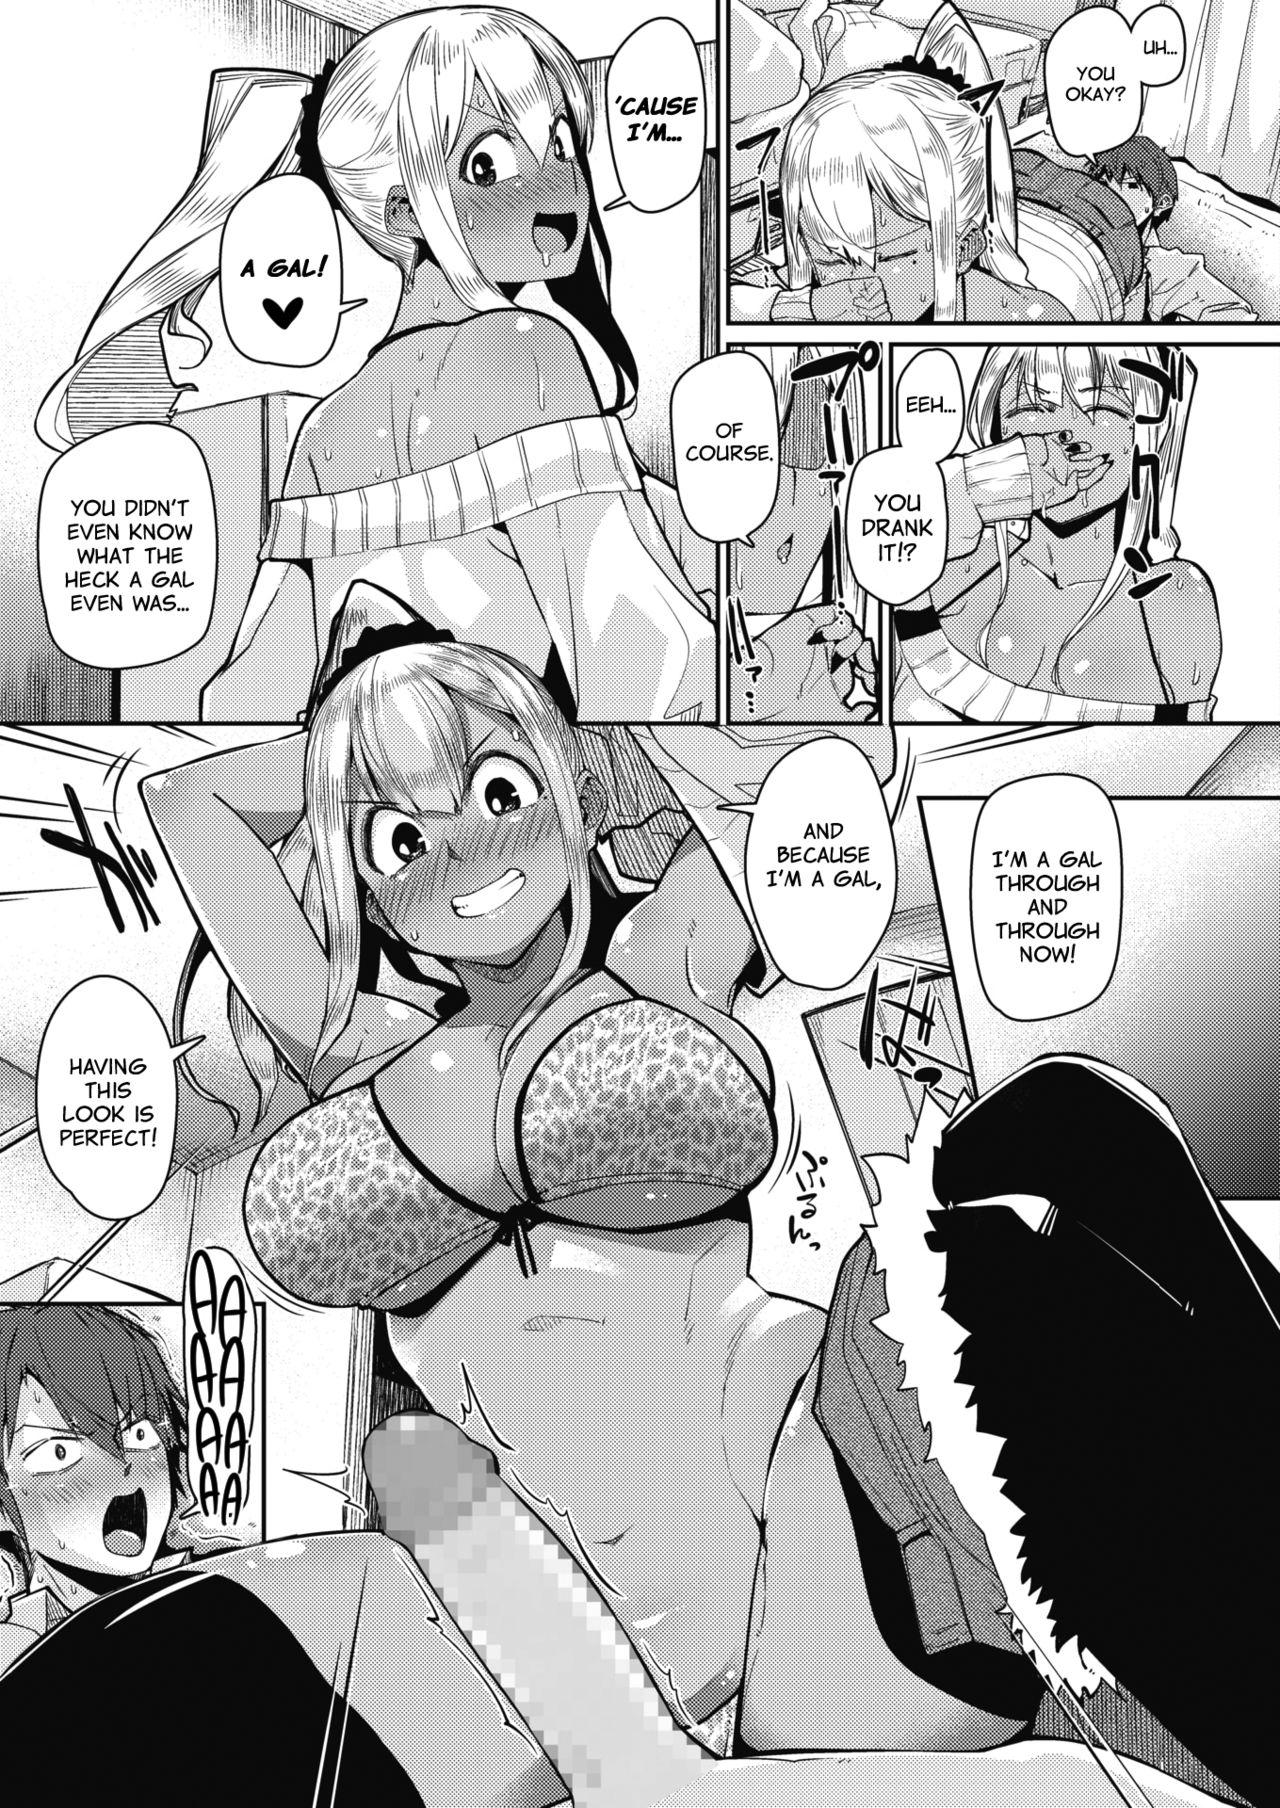 Ink Gekkan "Za Bicchi" wo Mita Onna no Hannou ni Tsuite | About the Reaction of the Girl Who Saw "The Bitch Monthly" Banging - Page 11